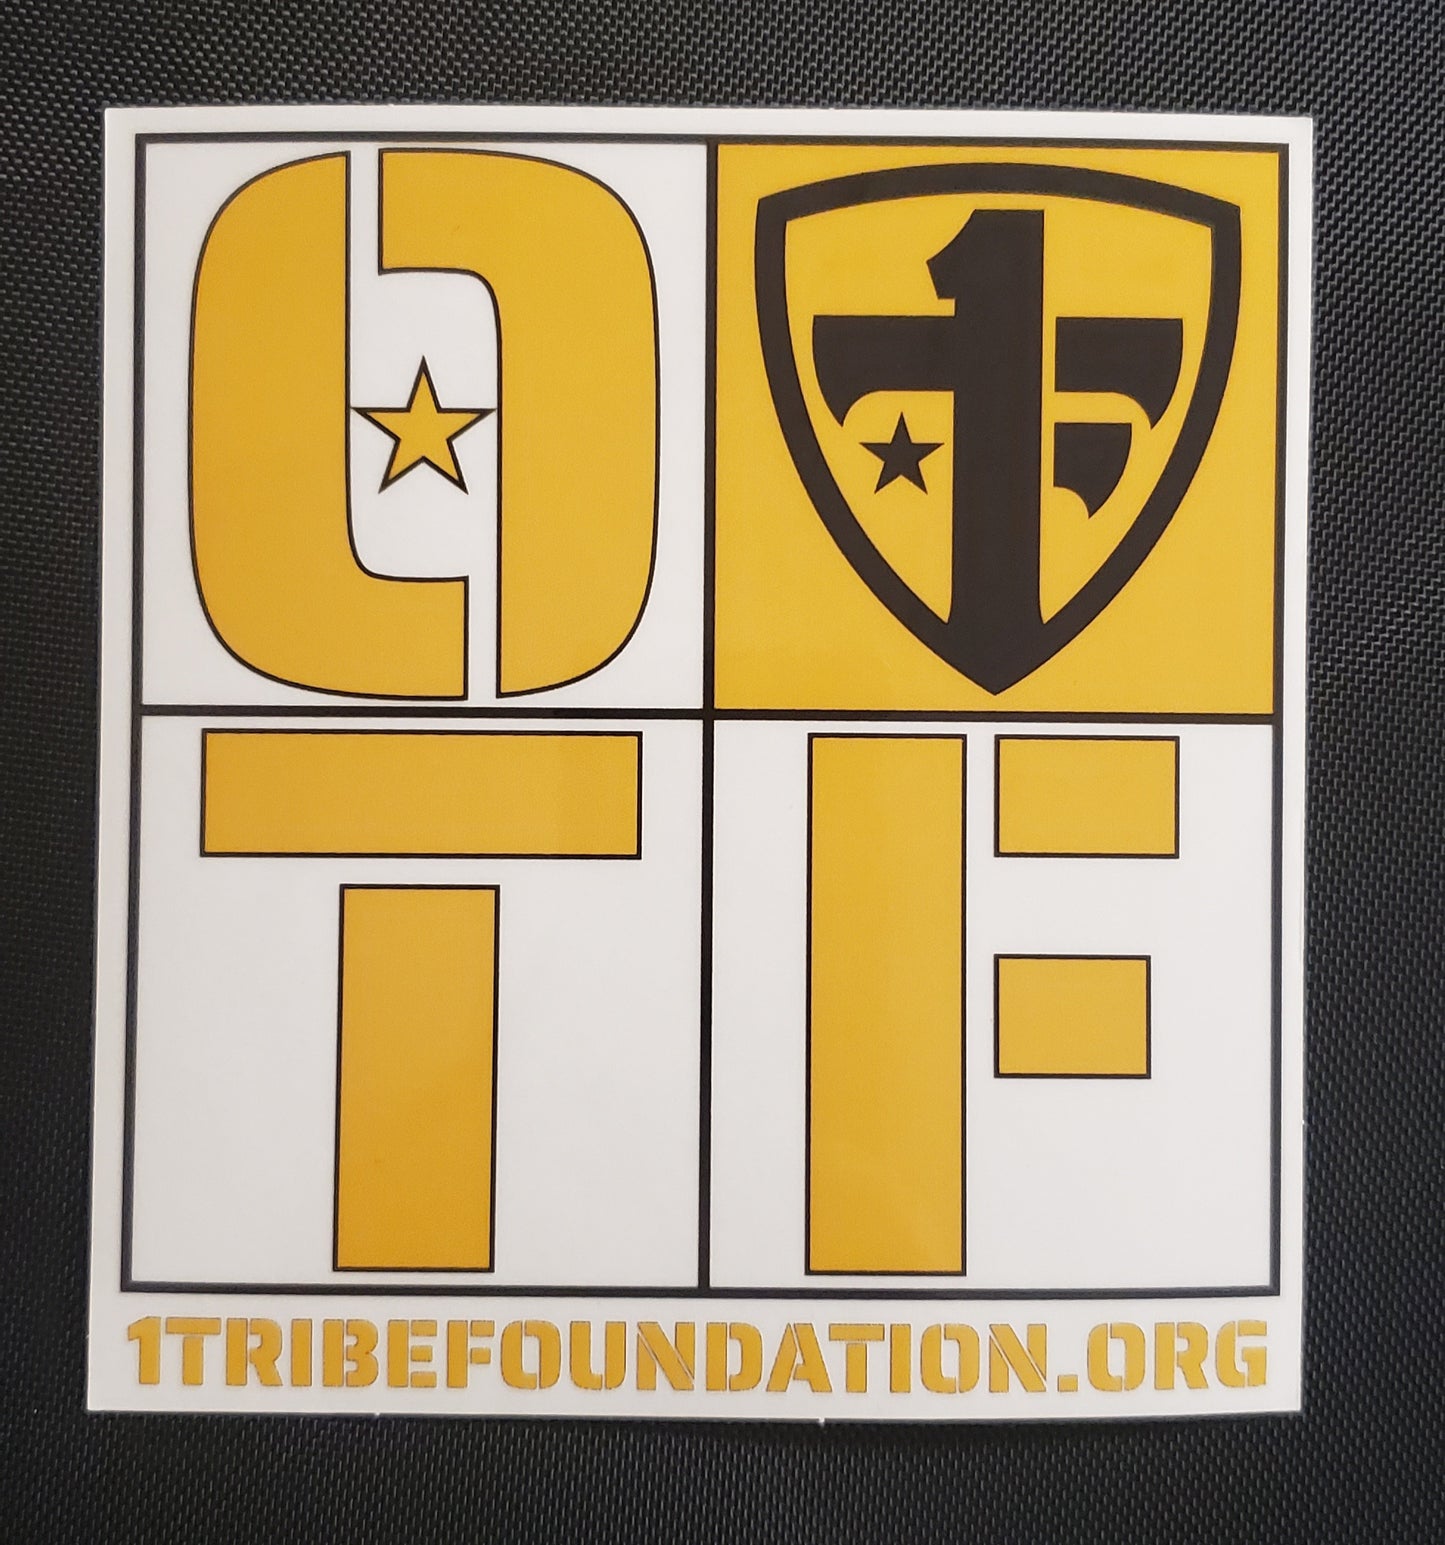 One Tribe Foundation transparent sticker in black and gold.